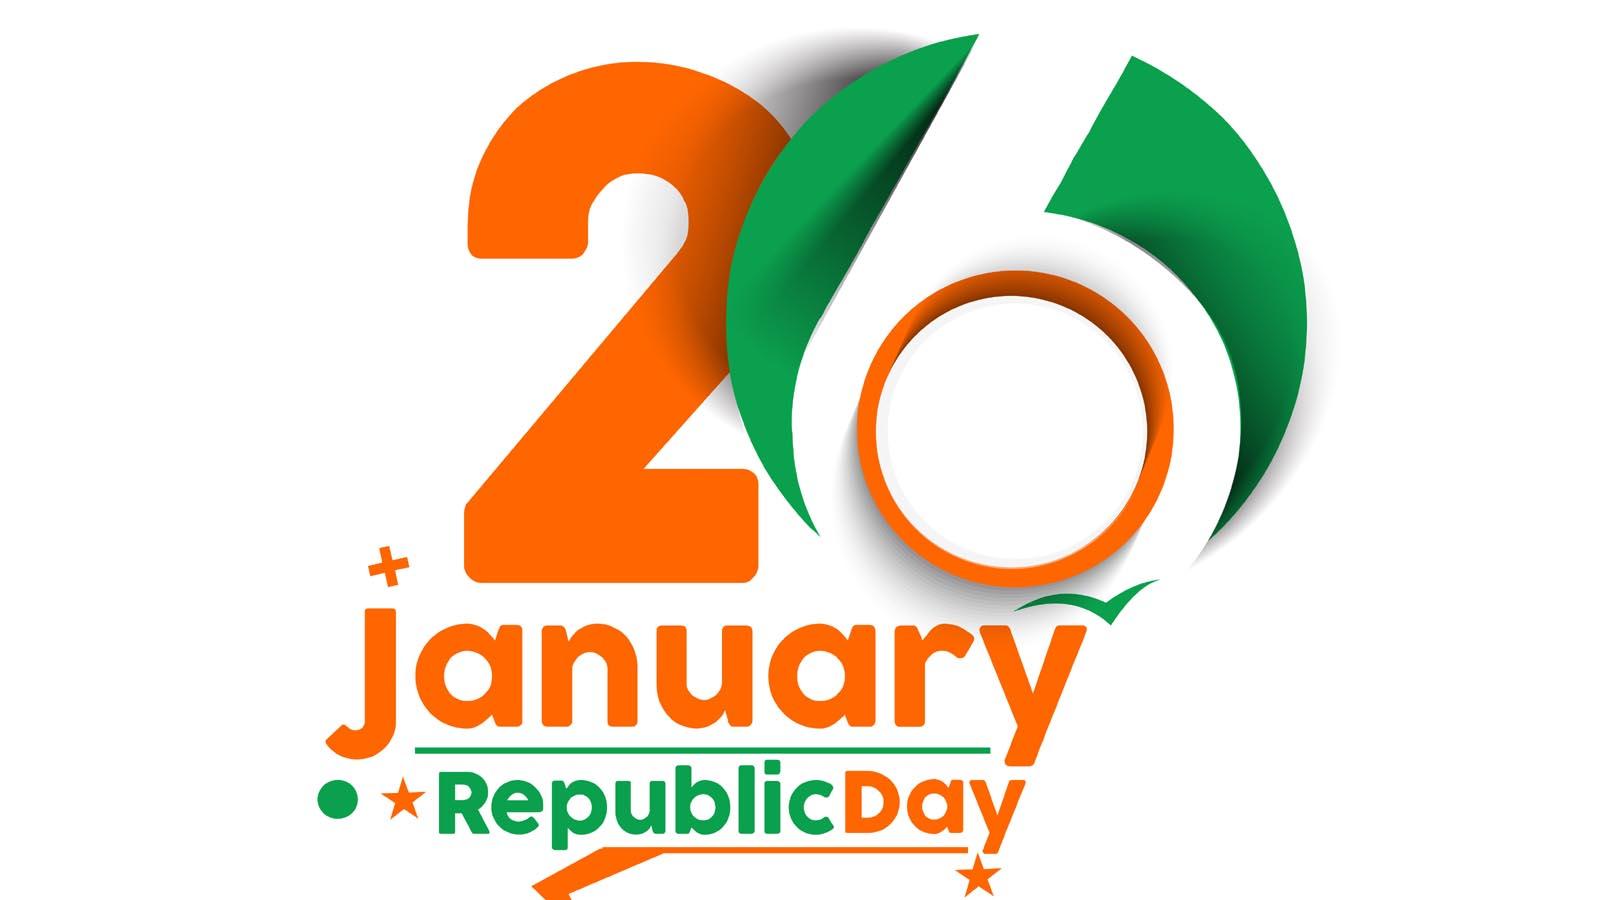 Happy Republic Day Wishes in Advance – Advance Republic Day Status Messages